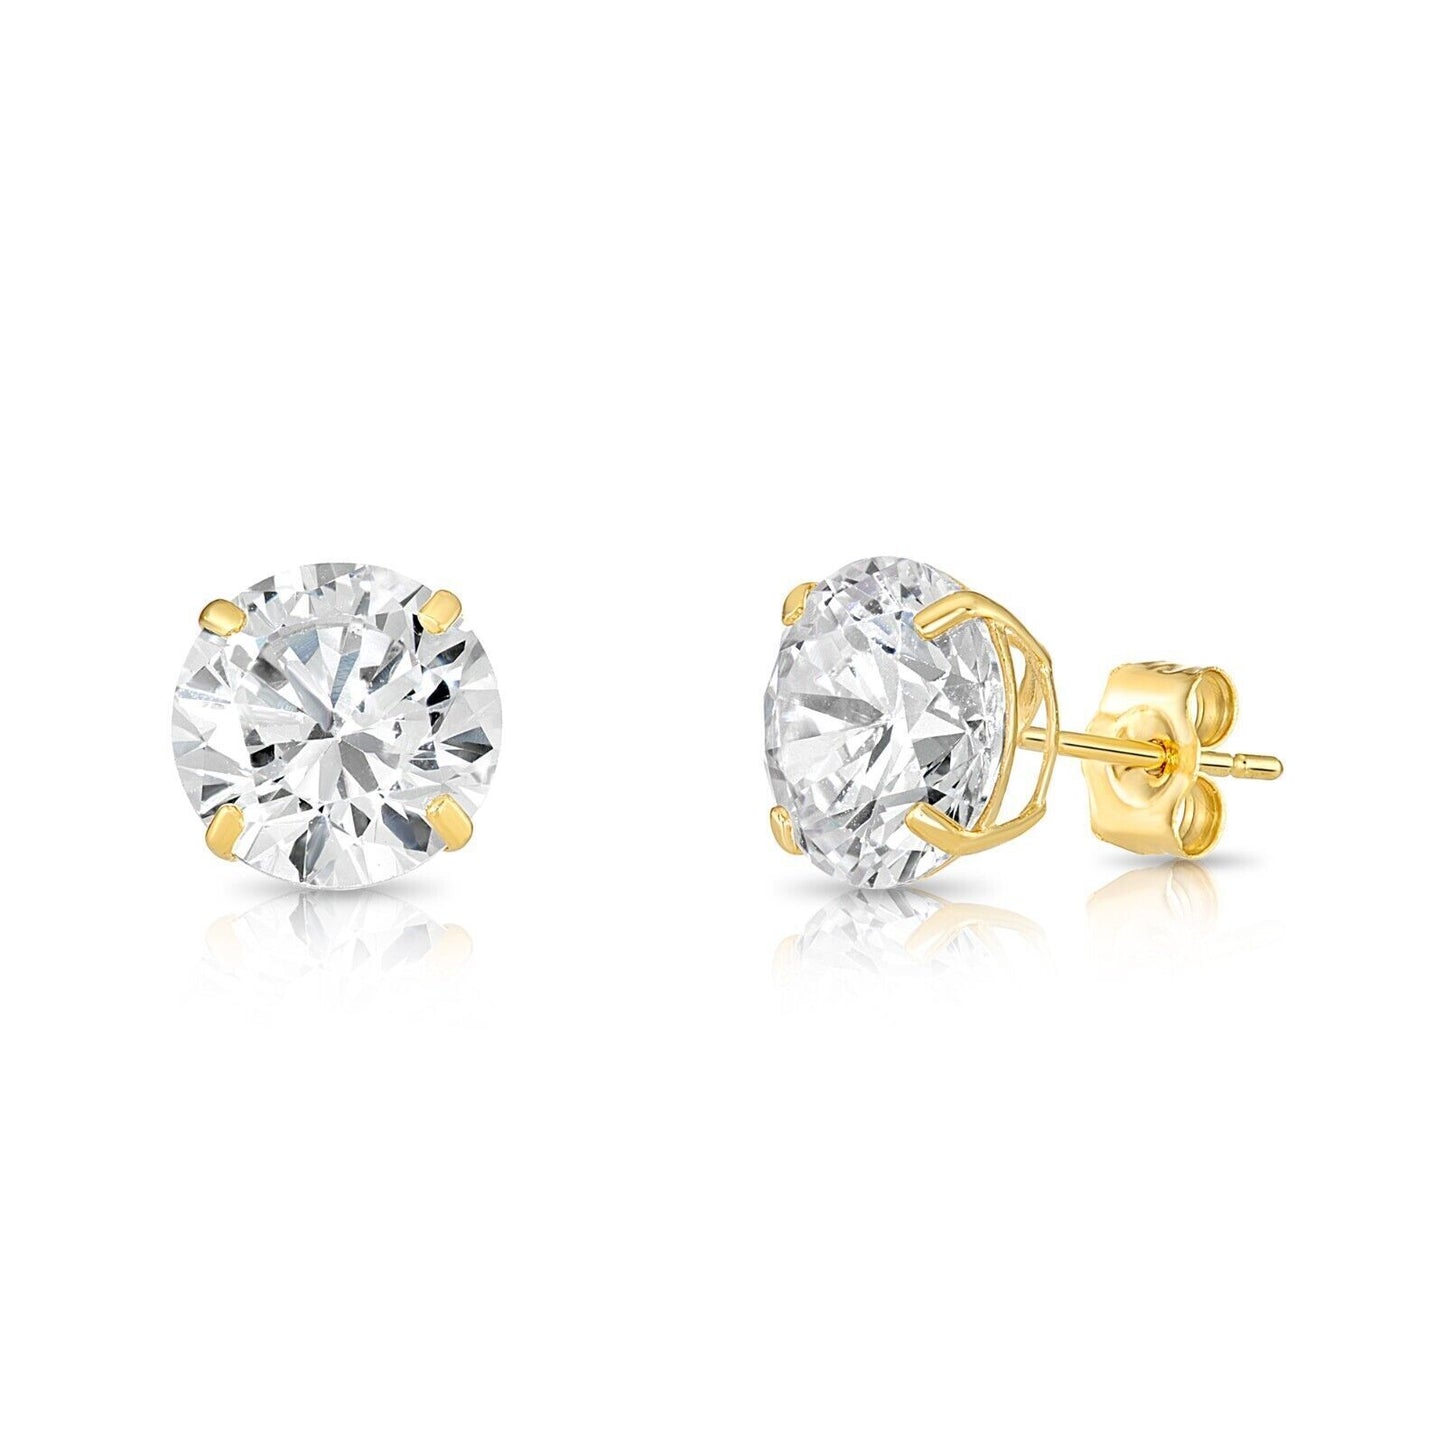 14K Solid Yellow or White Gold Round CZ Stud Earrings Basket Setting 2-10mm